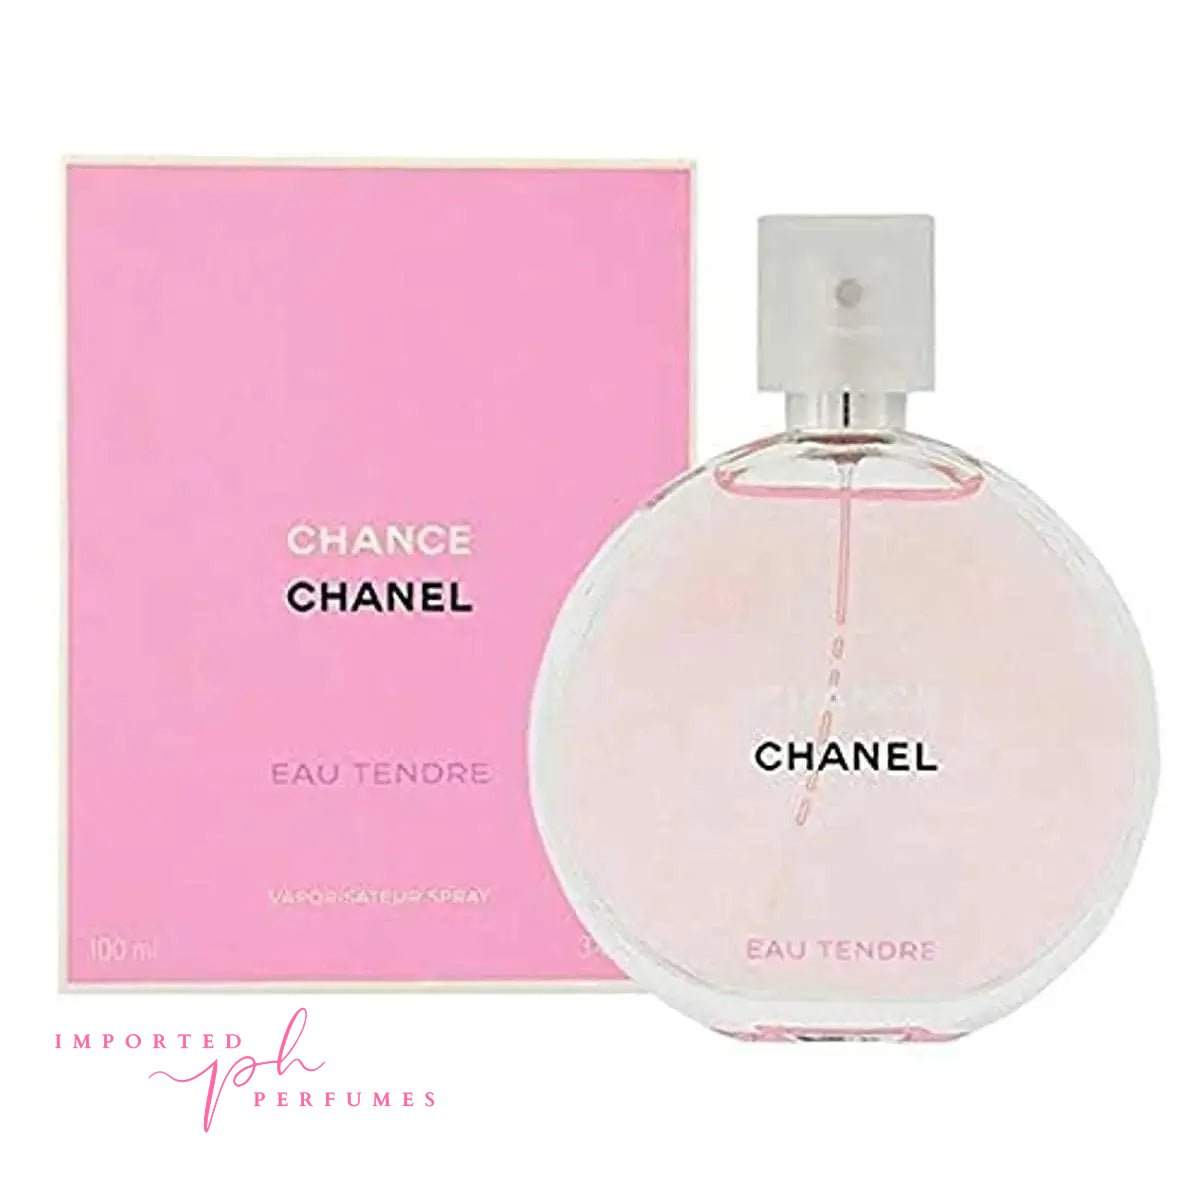 [TESTER] Chance Eau Tendre by Chanel for Women EDT 100ml-Imported Perfumes Co-100ml,Chanel,TESTER,Women